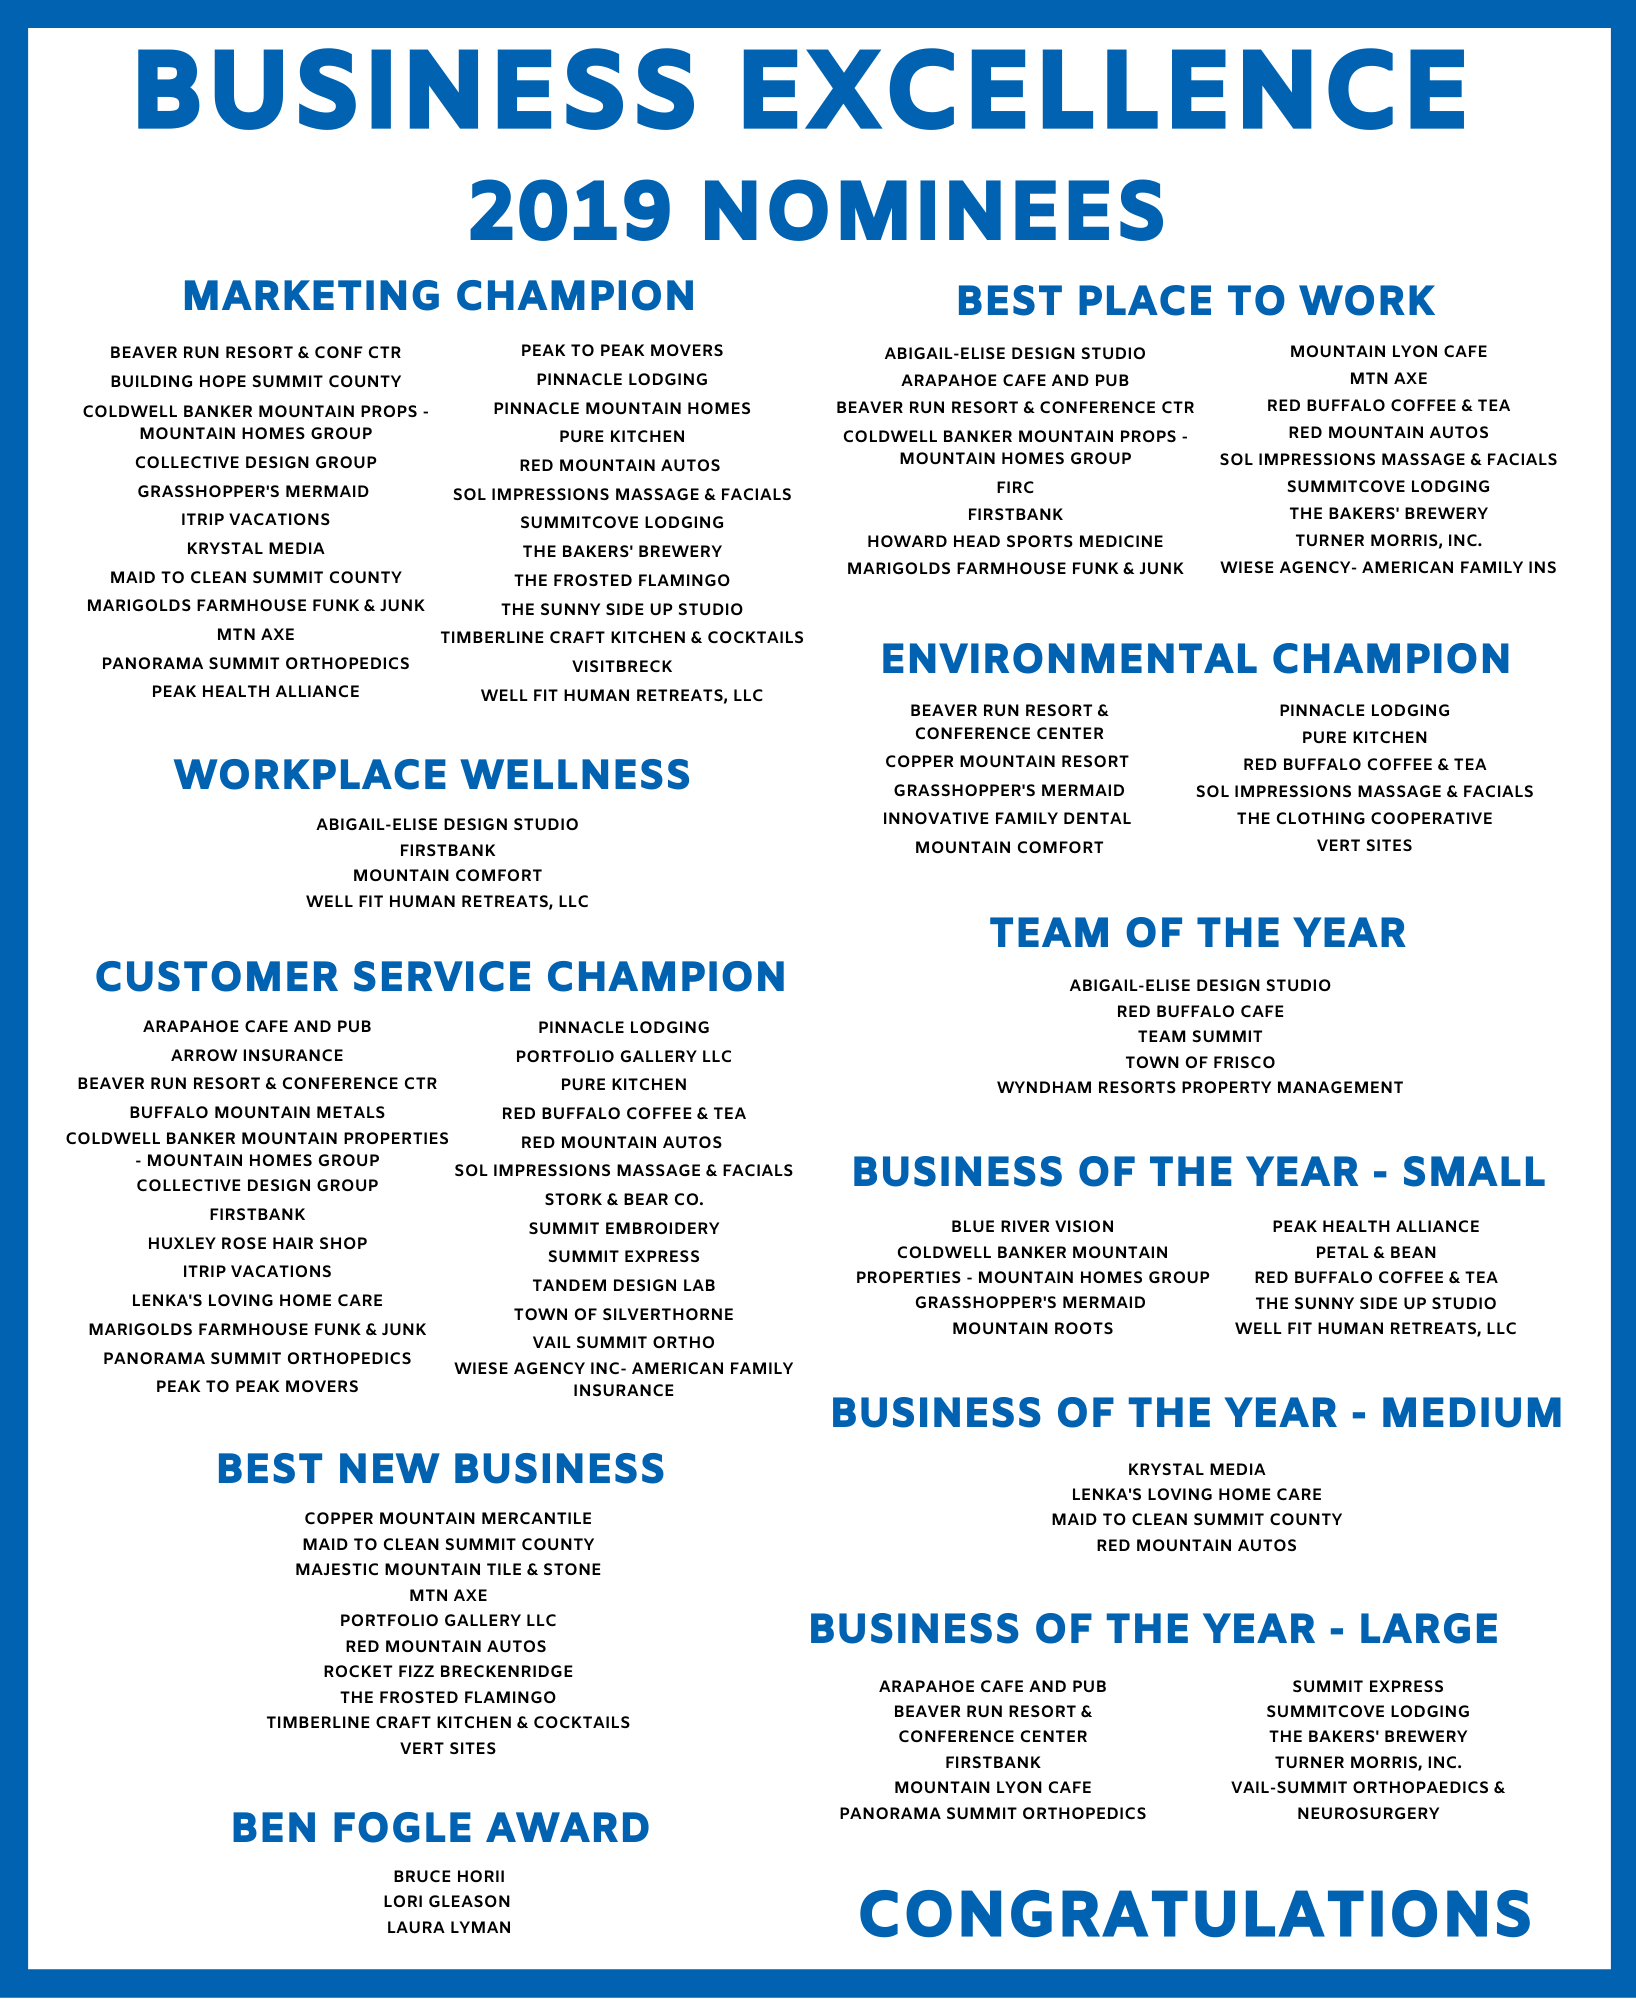 Business Excellence 2019 Nominees